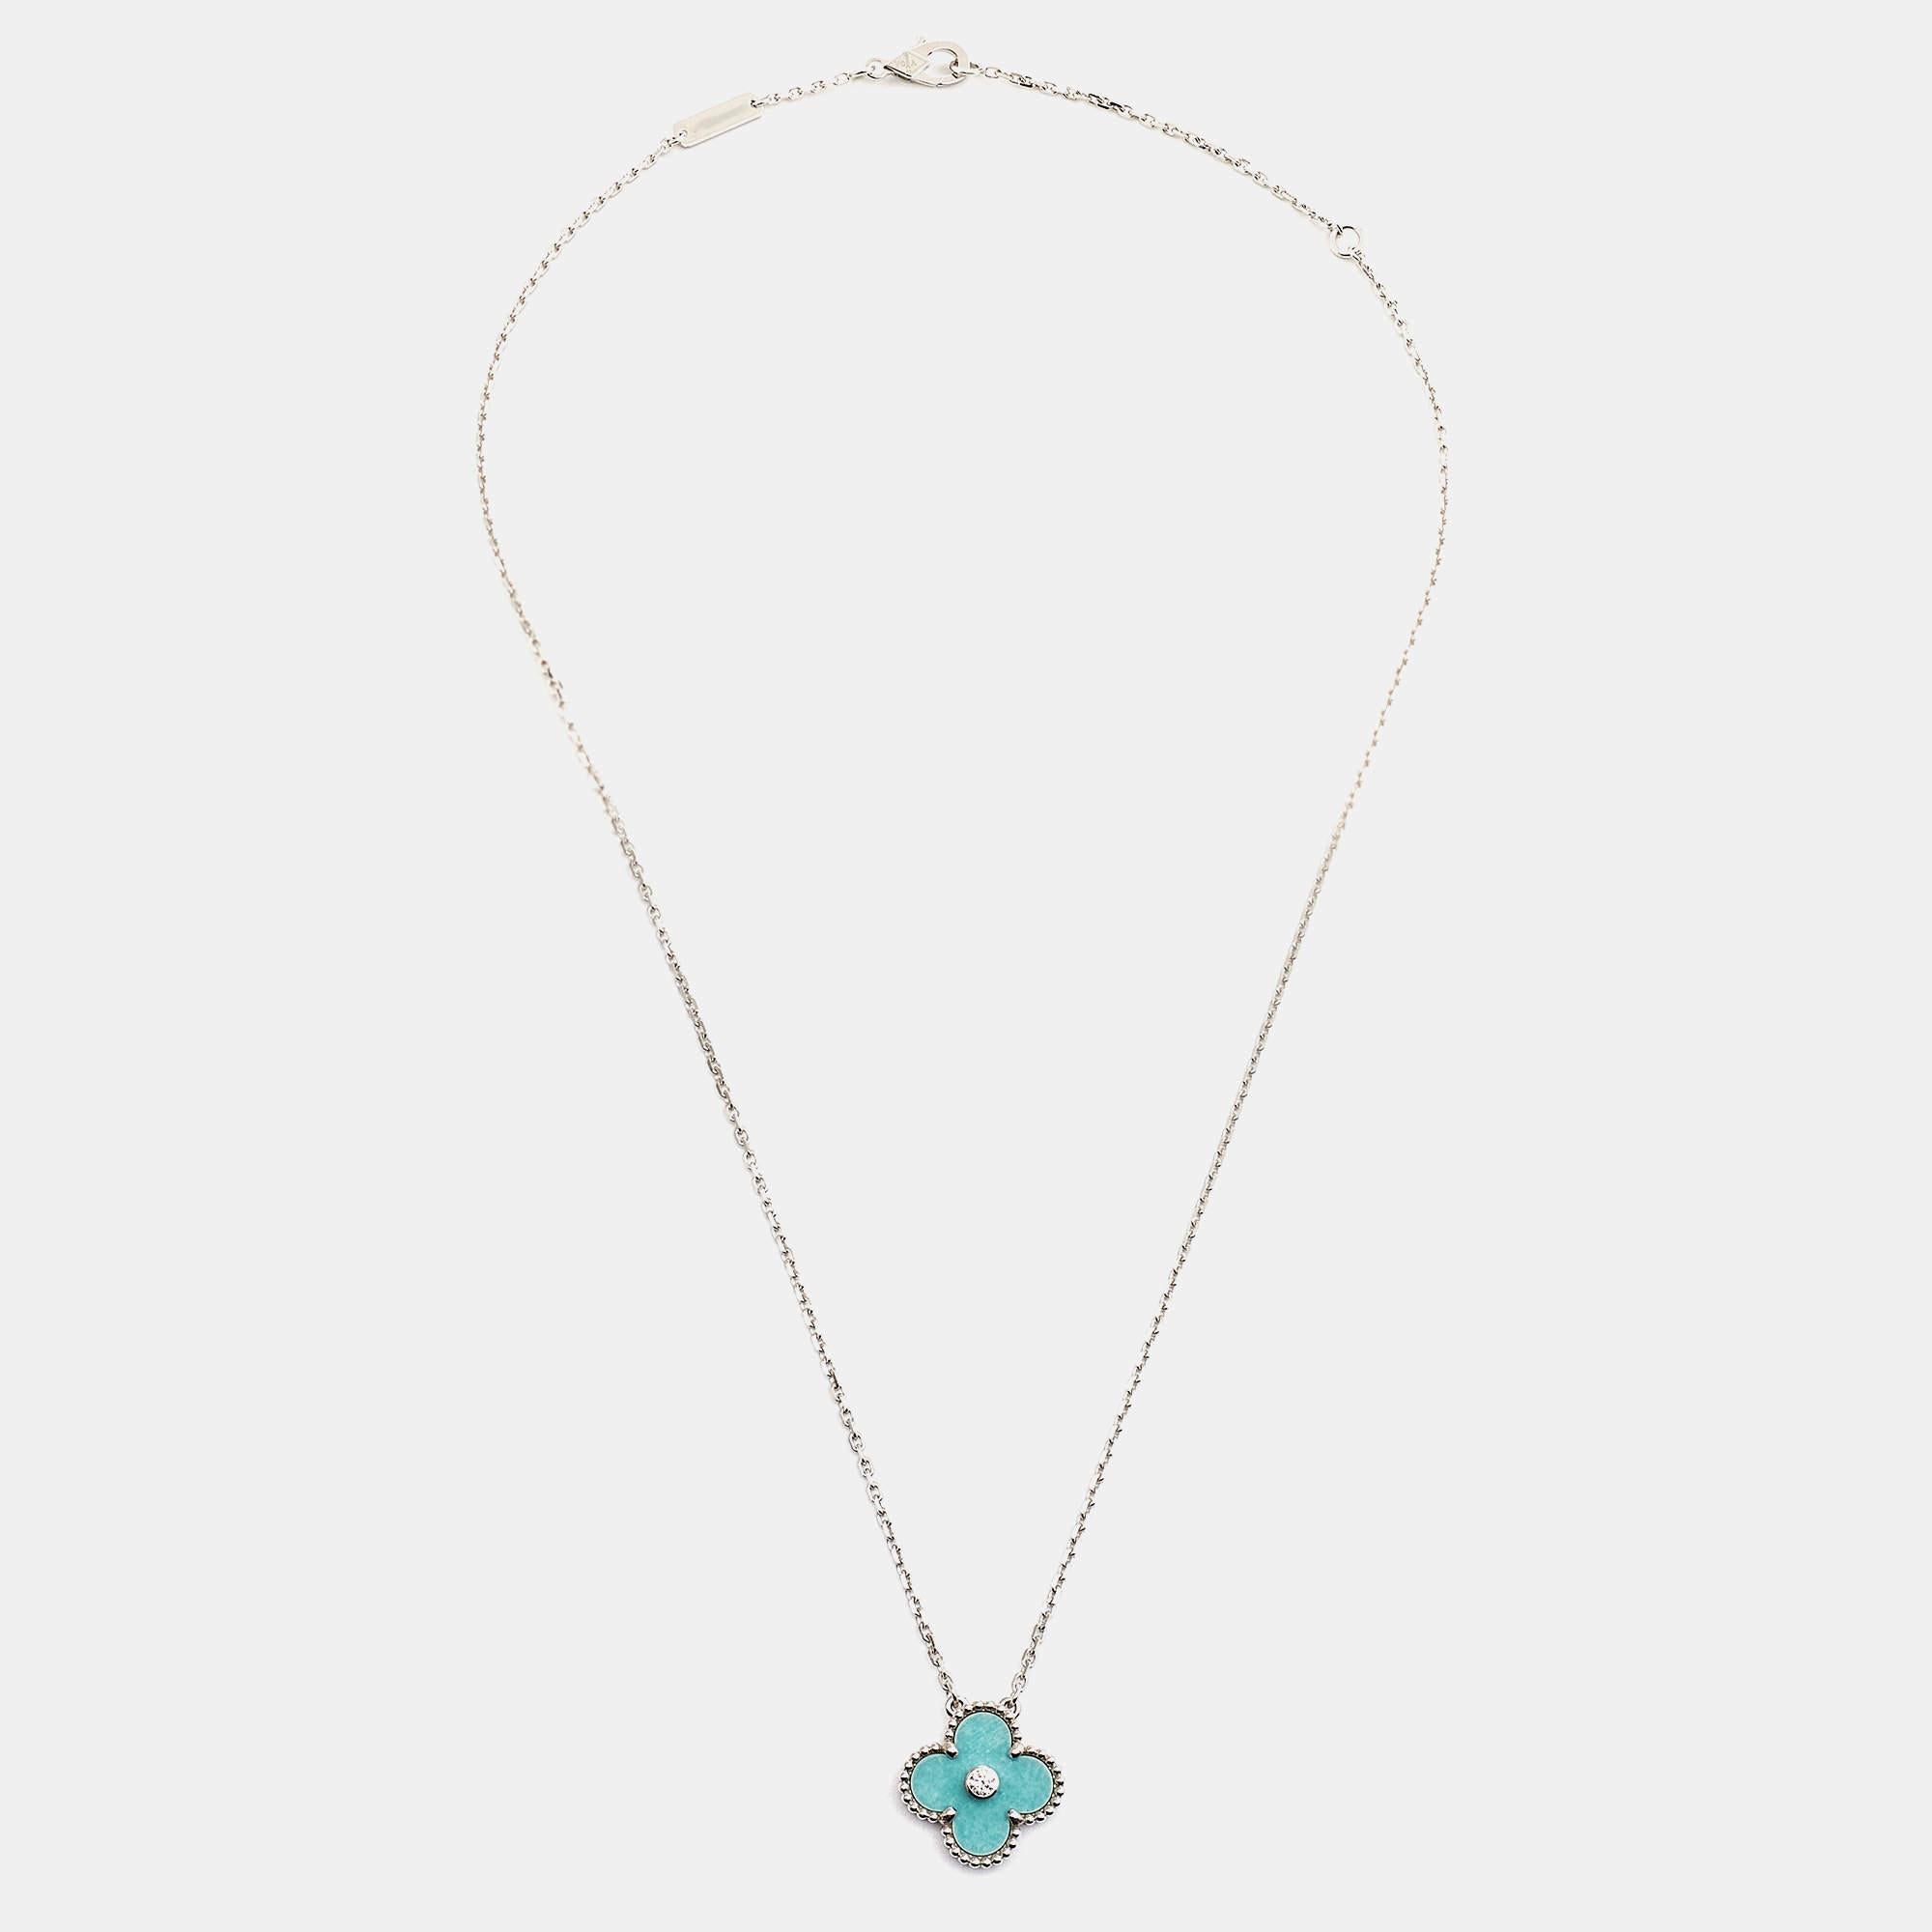 Van Cleef & Arpels’ Alhambra jewel was first created in 1968, and the Vintage Alhambra creations remain faithful to its timeless elegance. The iconic clover motif is a potent symbol of luck and comes adorned with a signature bead setting on the